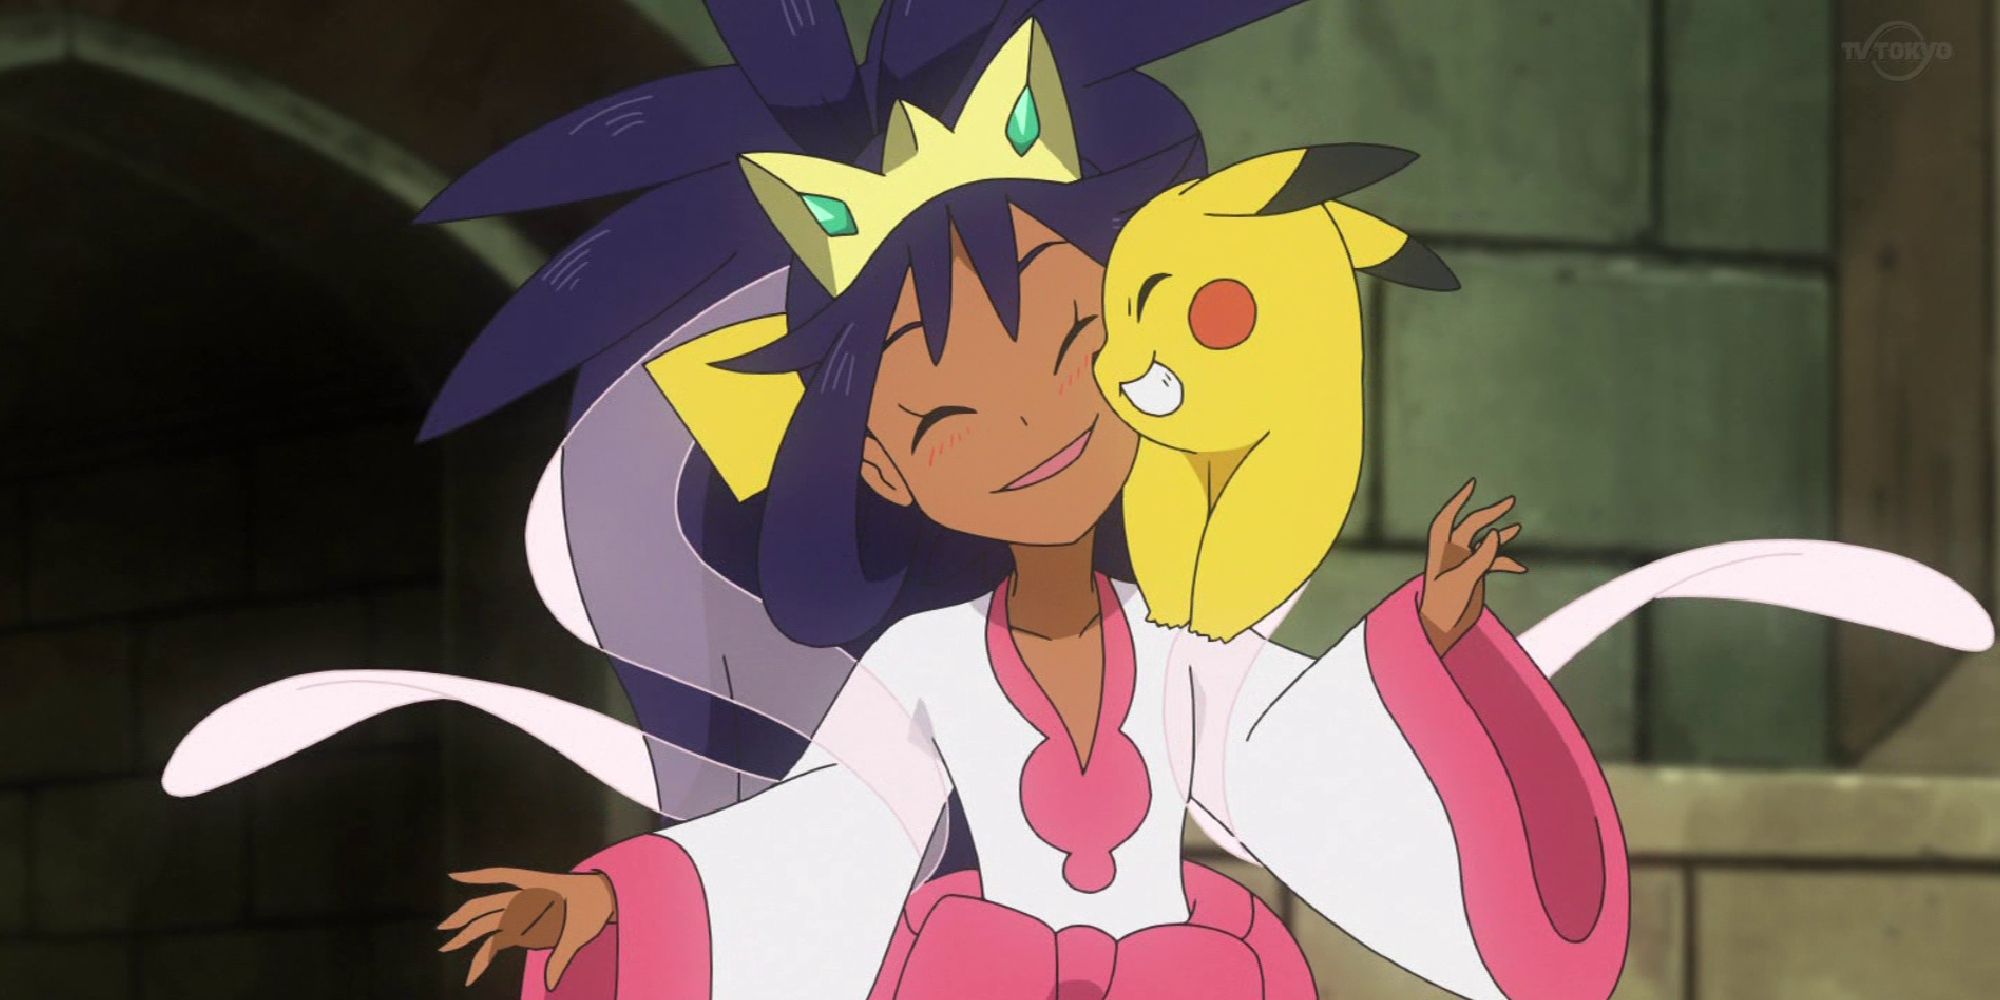 Iris in her Unova Champion outfit cuddling with Pikachu 